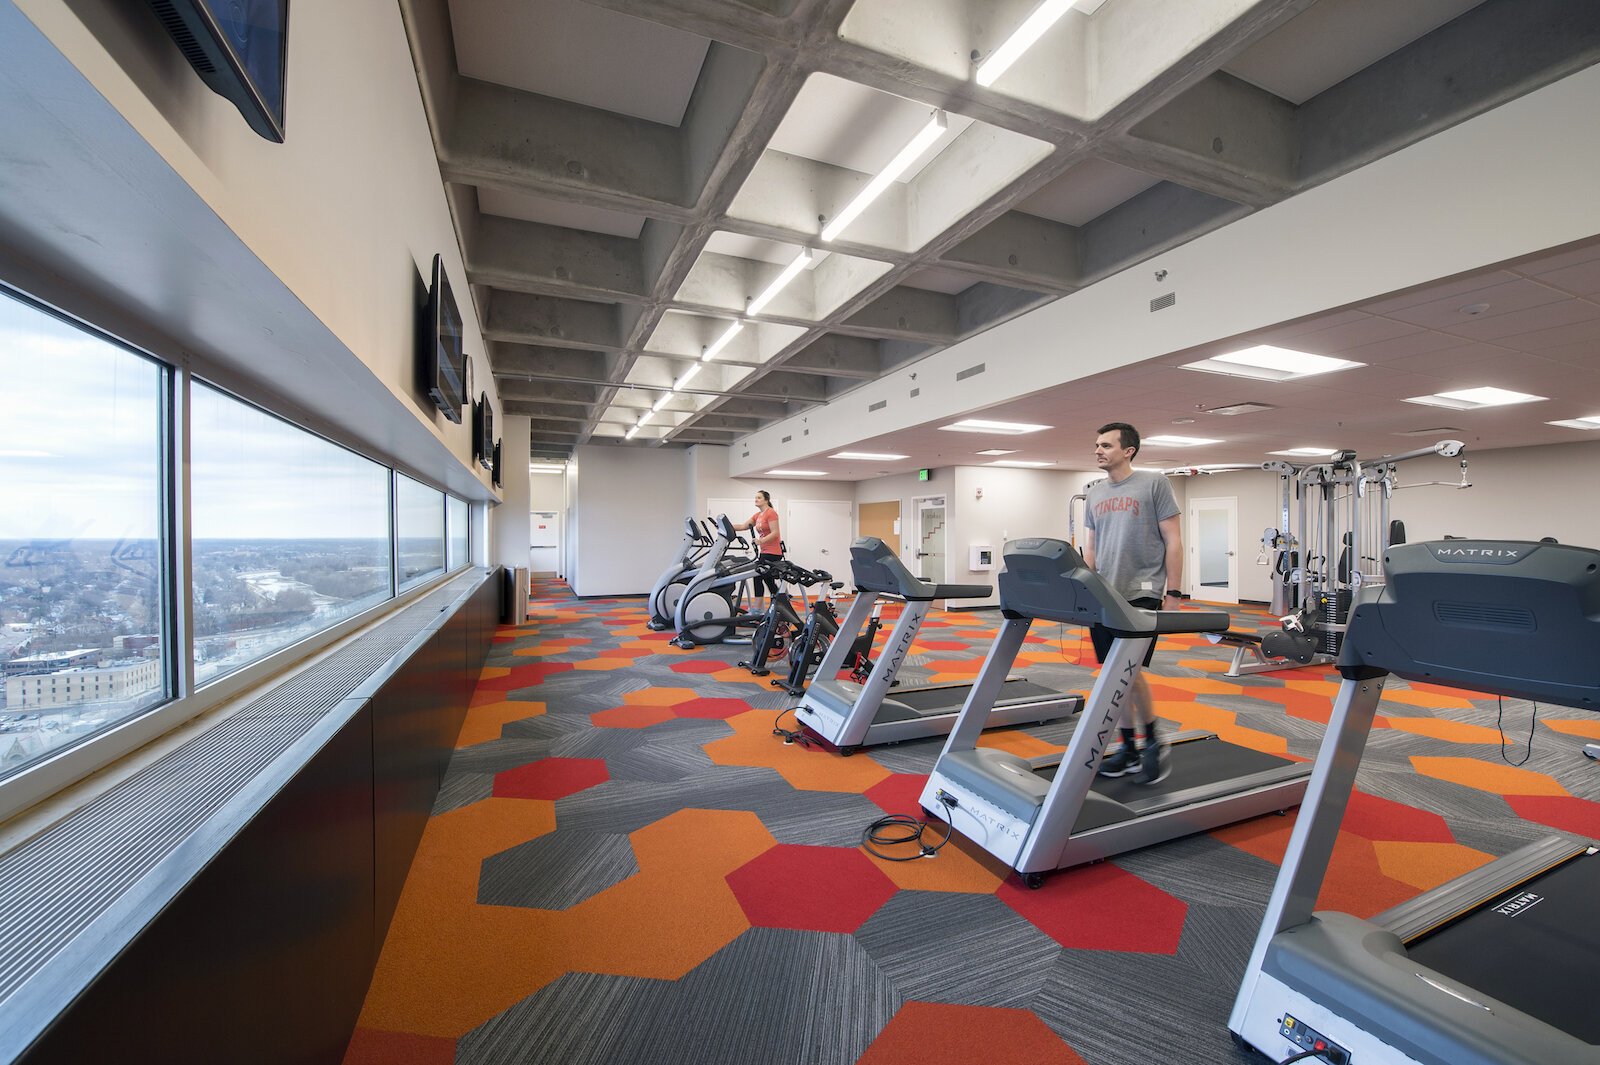 At Indiana Michigan Power Center’s Corporate Headquarters in Fort Wayne, Design Collaborative designed a fitness studio for employees that overlooks the outdoors.